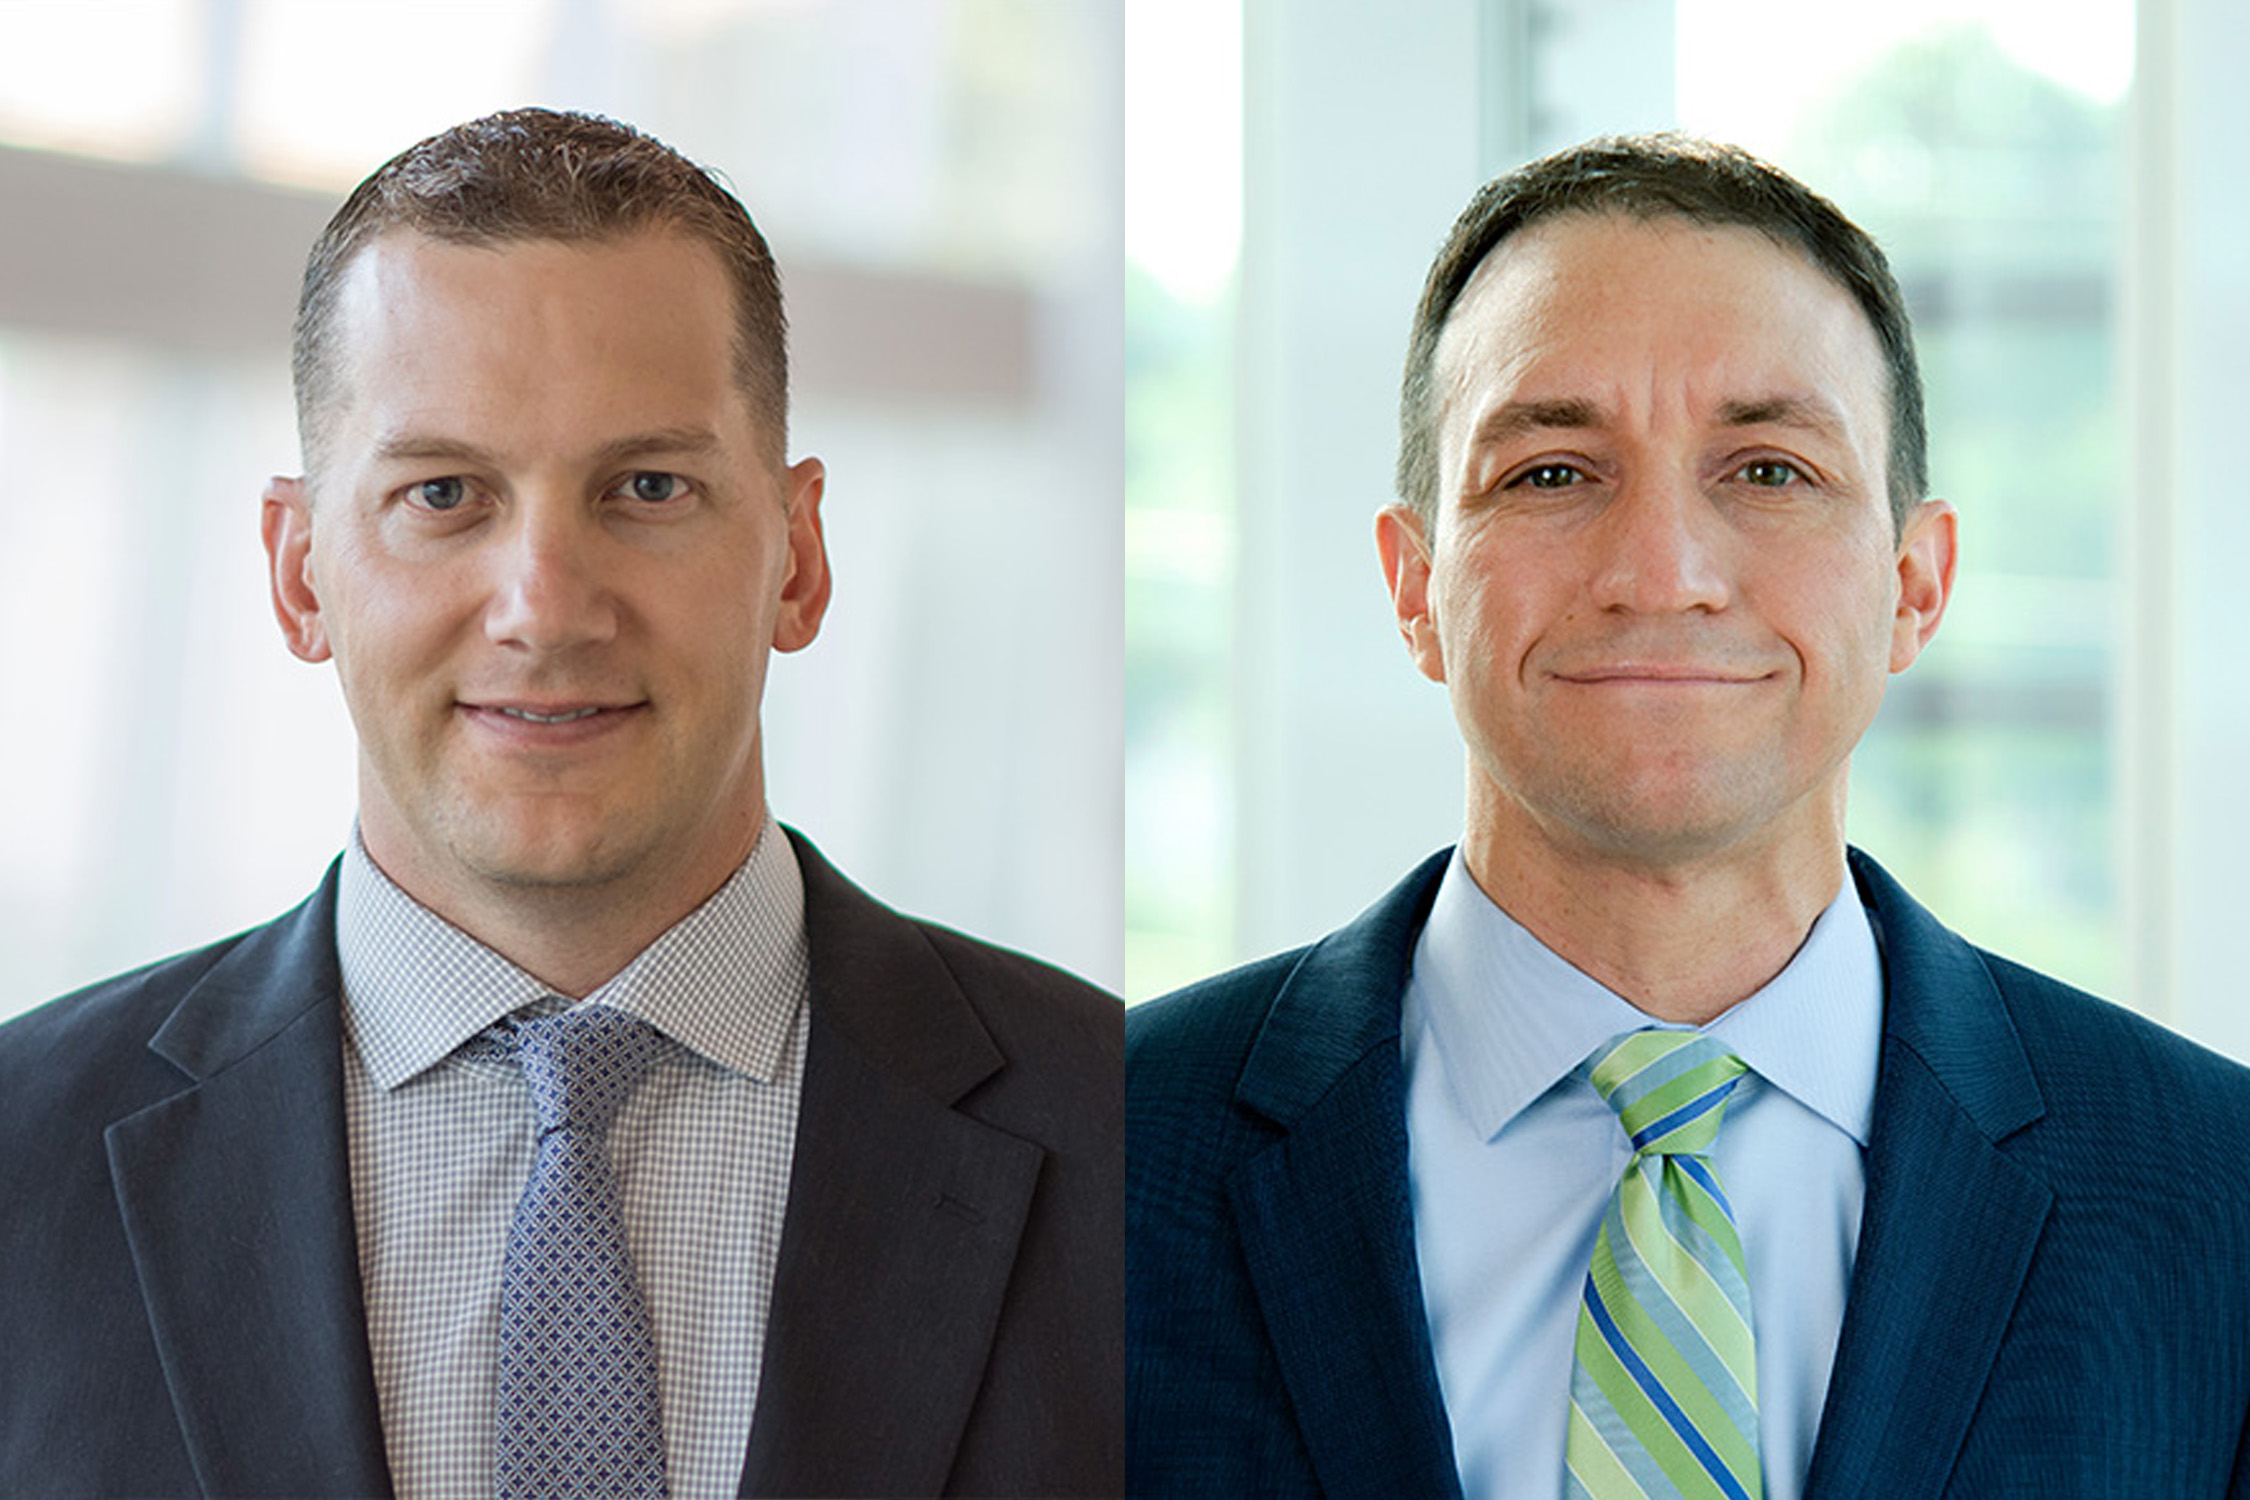 Kyle Ringenberg&comma; MD&comma; and Troy Wildes&comma; MD